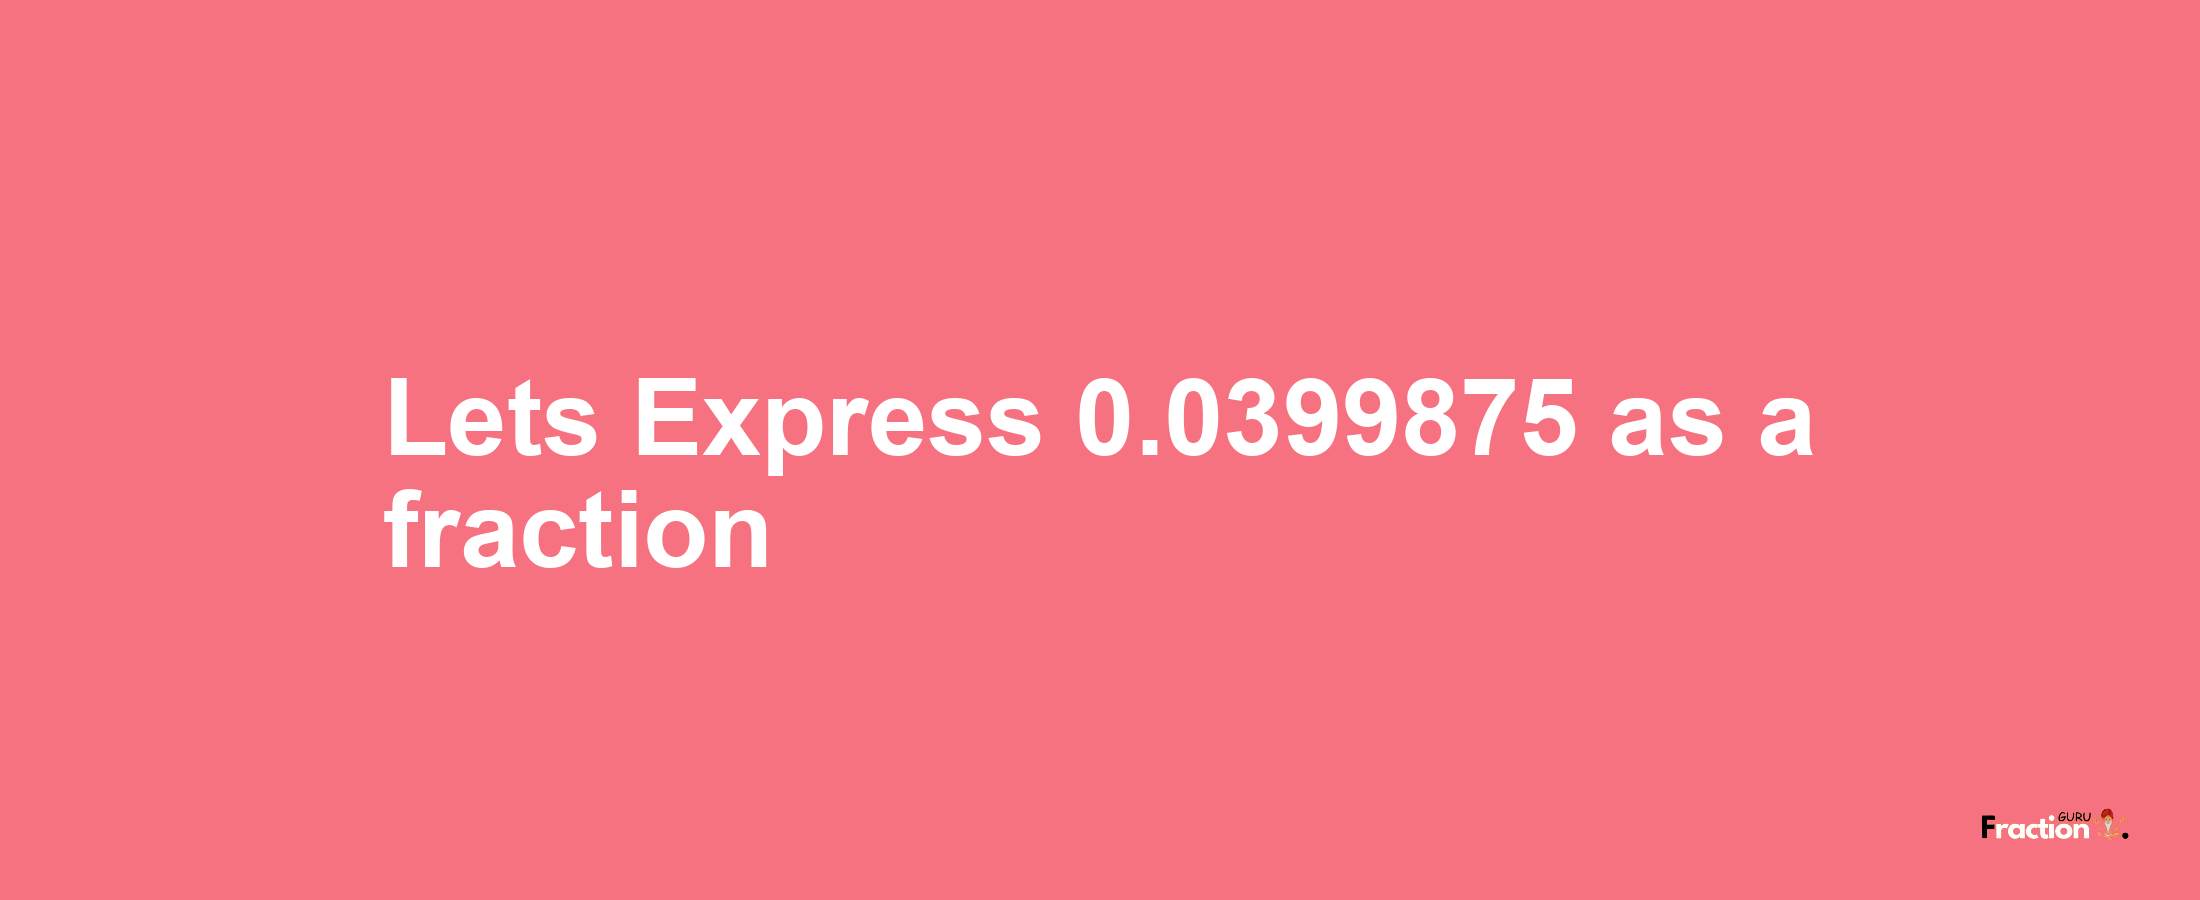 Lets Express 0.0399875 as afraction